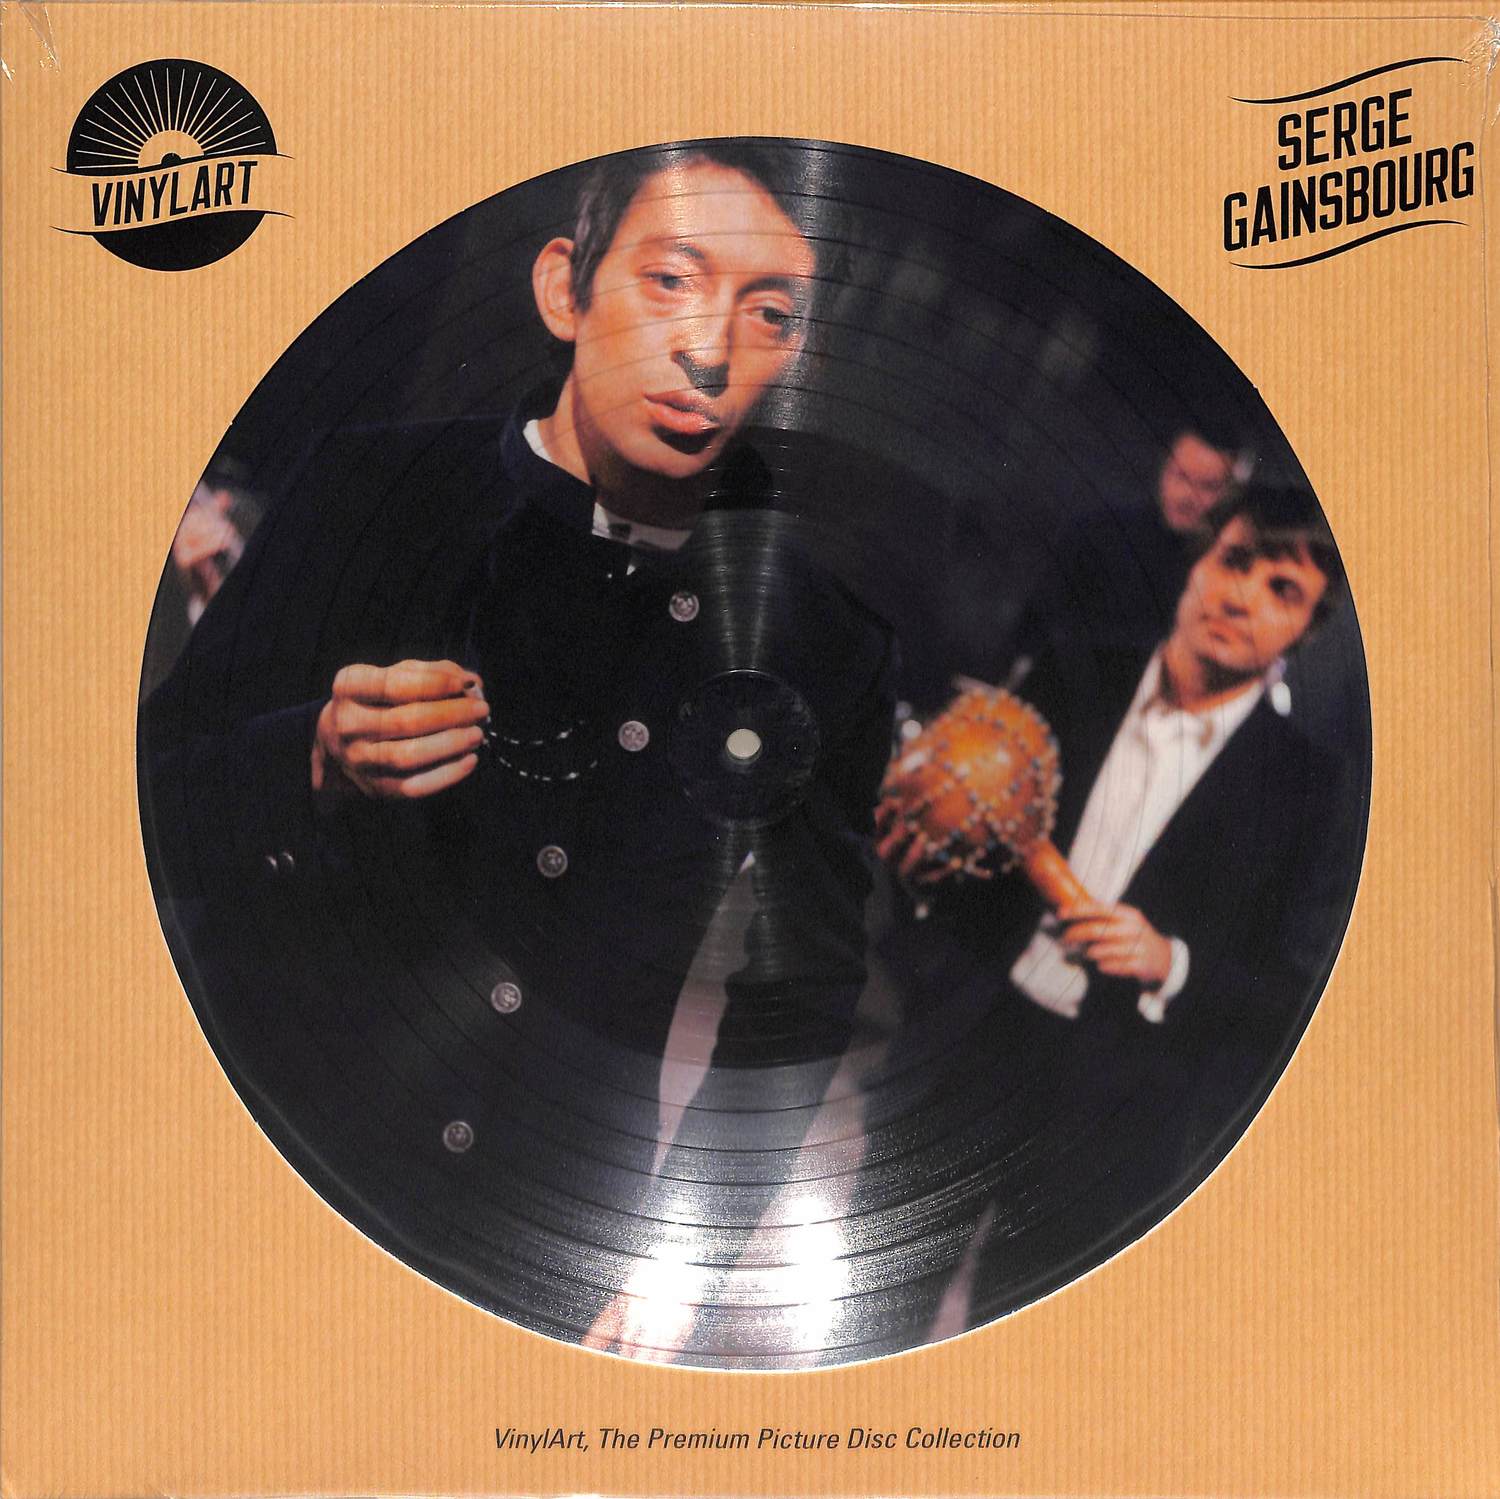 Serge Gainsbourg - VINYLART - THE PREMIUM PICTURE DISC COLLECTION 